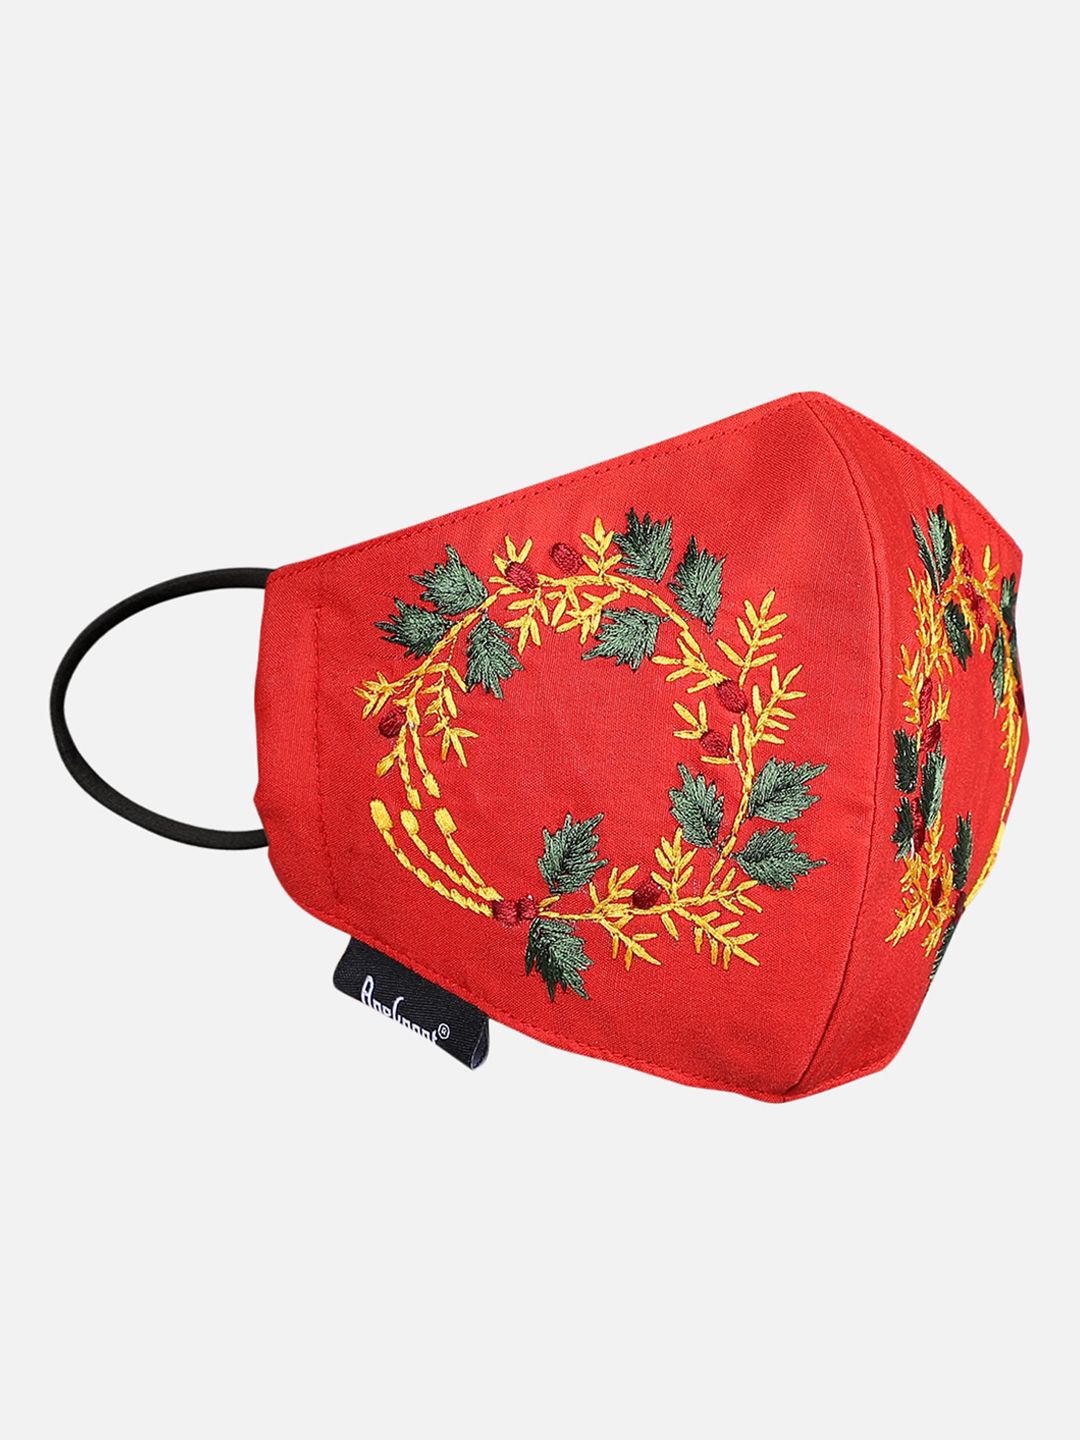 Anekaant Women Red & Green Floral Embroidered 3-Ply Reusable Cloth Mask Price in India